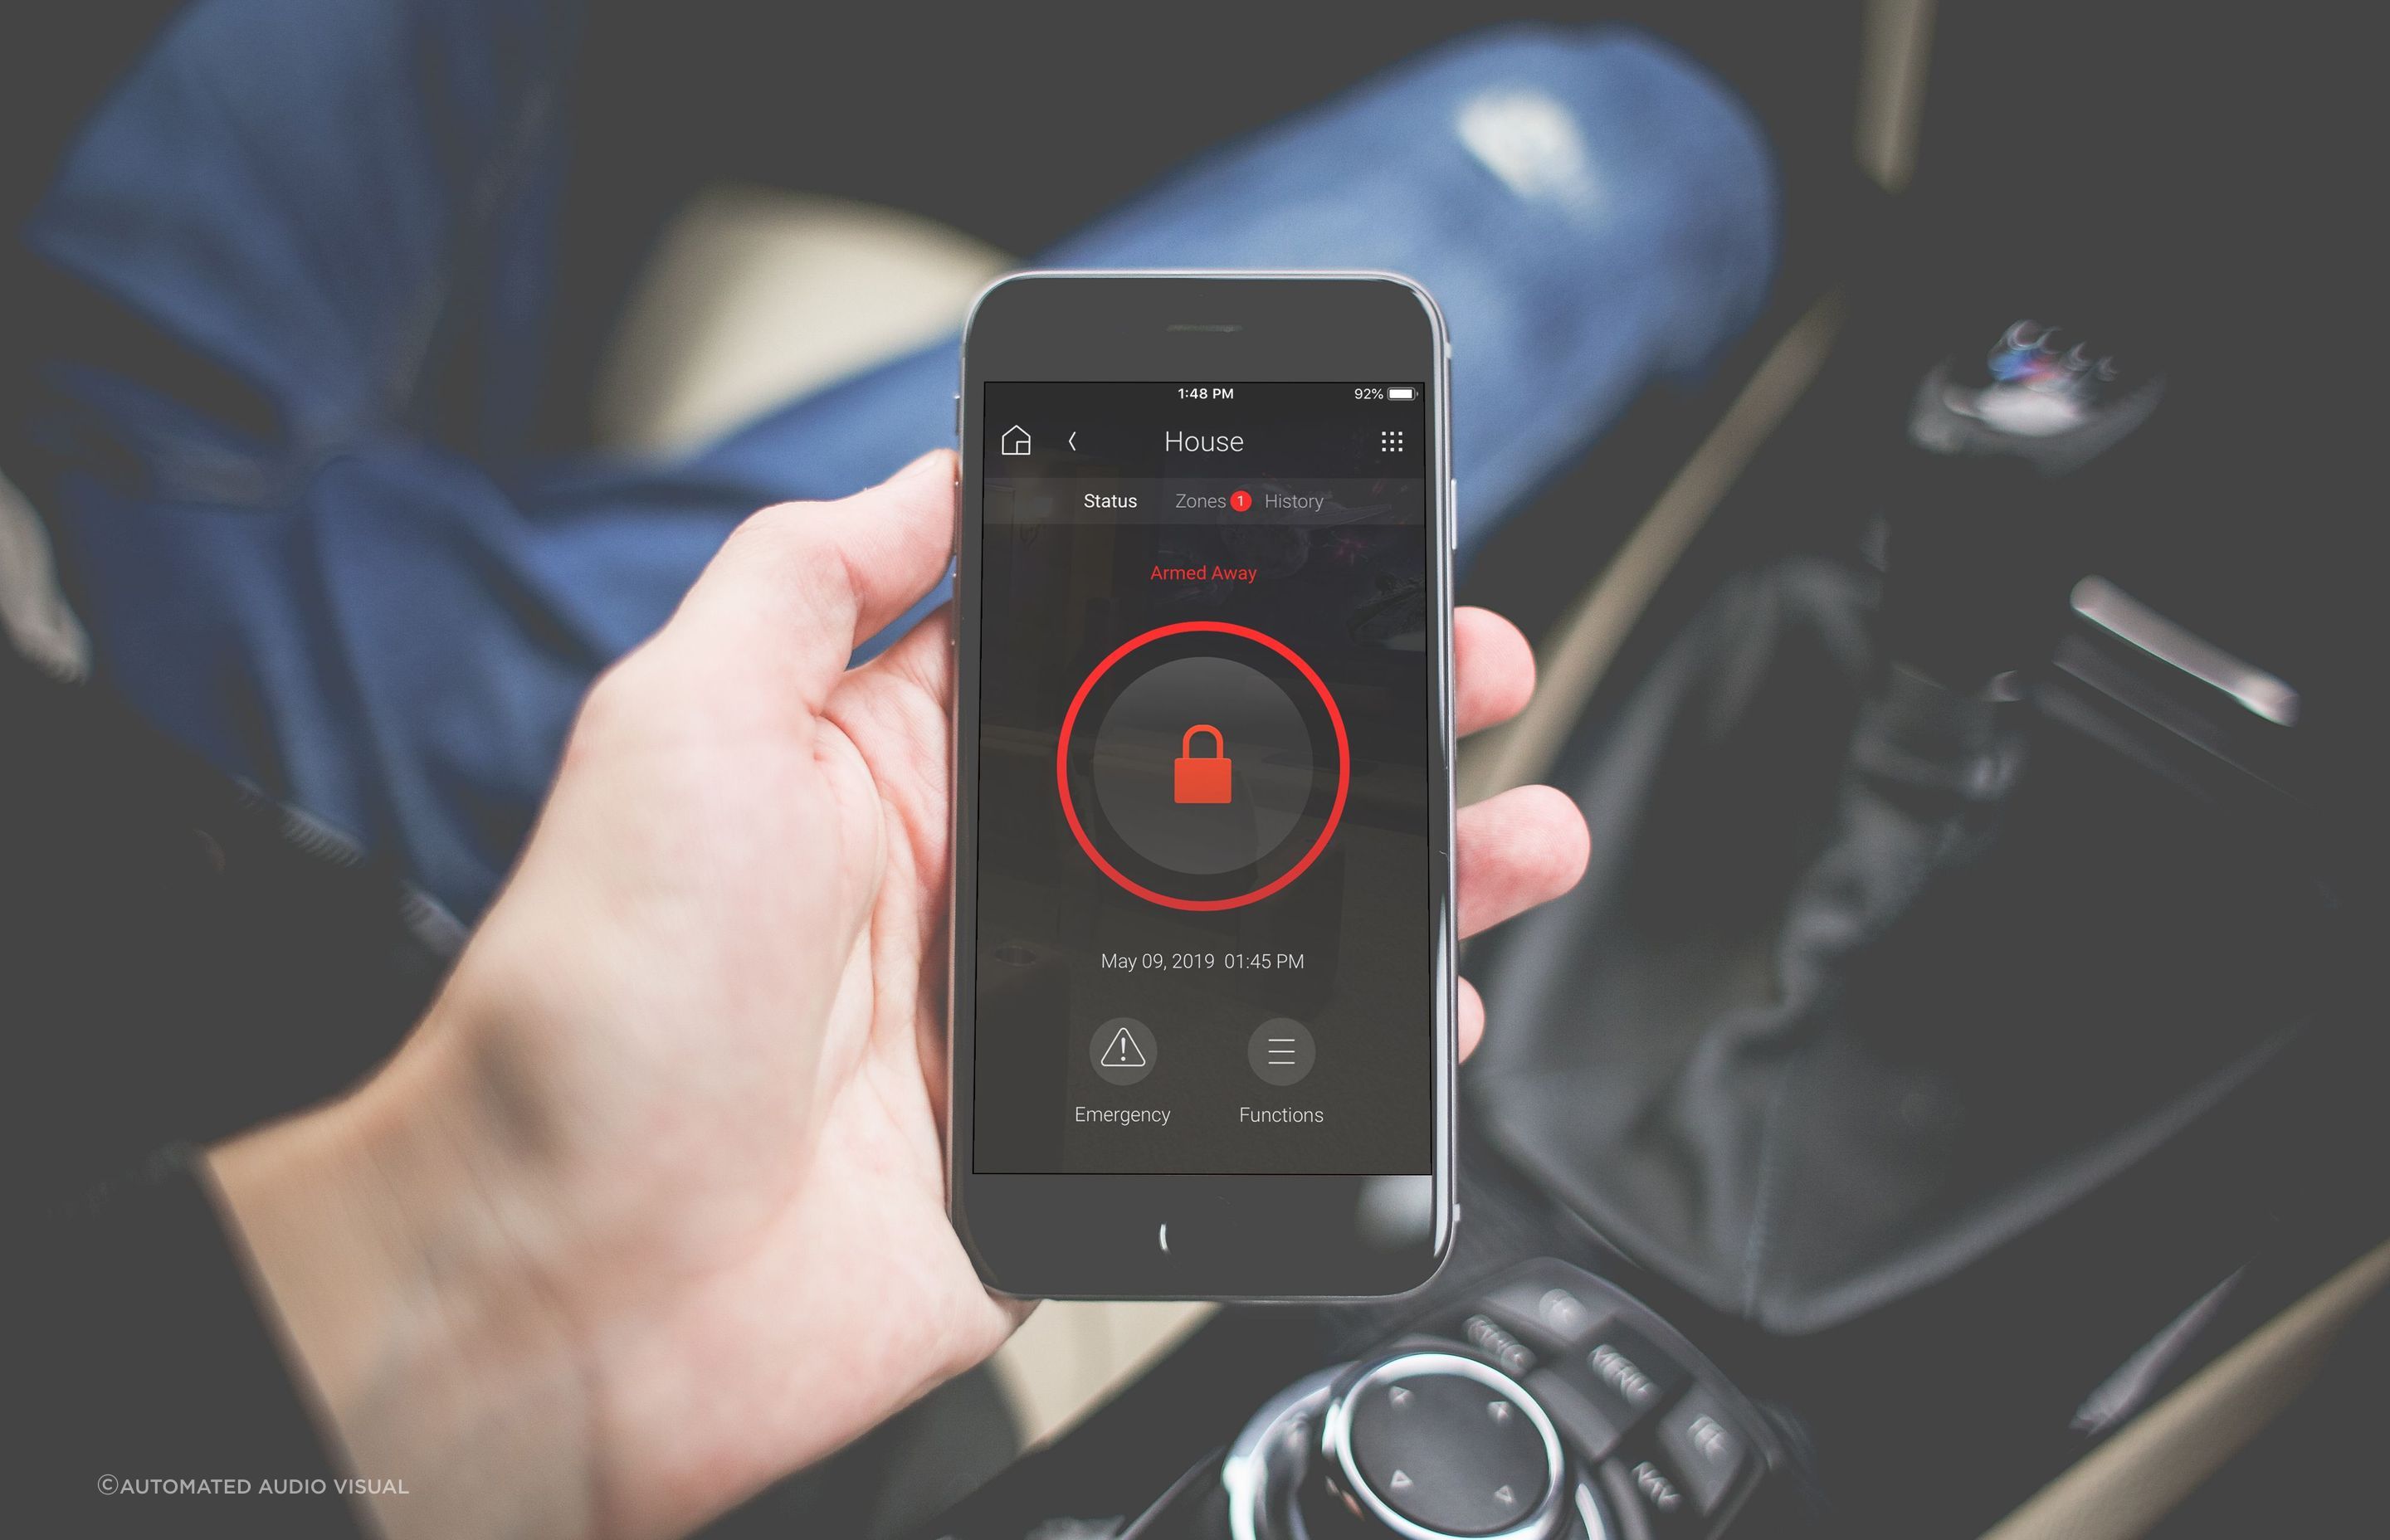 Controlling smart home security from a phone app enables you to monitor and adjust security settings remotely, receiving instant notifications of any alerts.